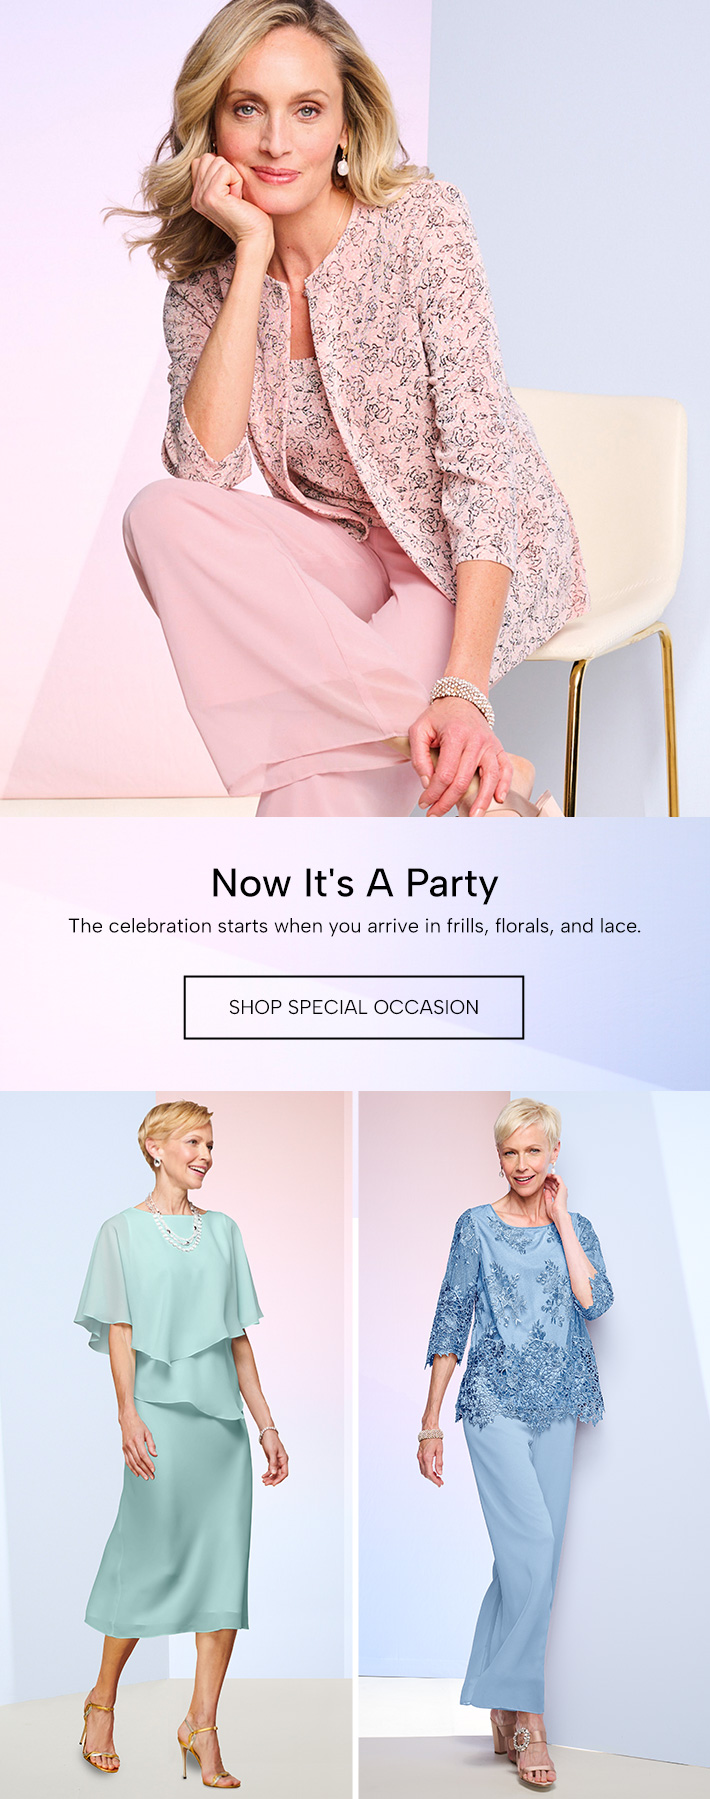 Now It's A Party The celebration starts when you arrive in frills, florals, and lace. Shop Special Occasion